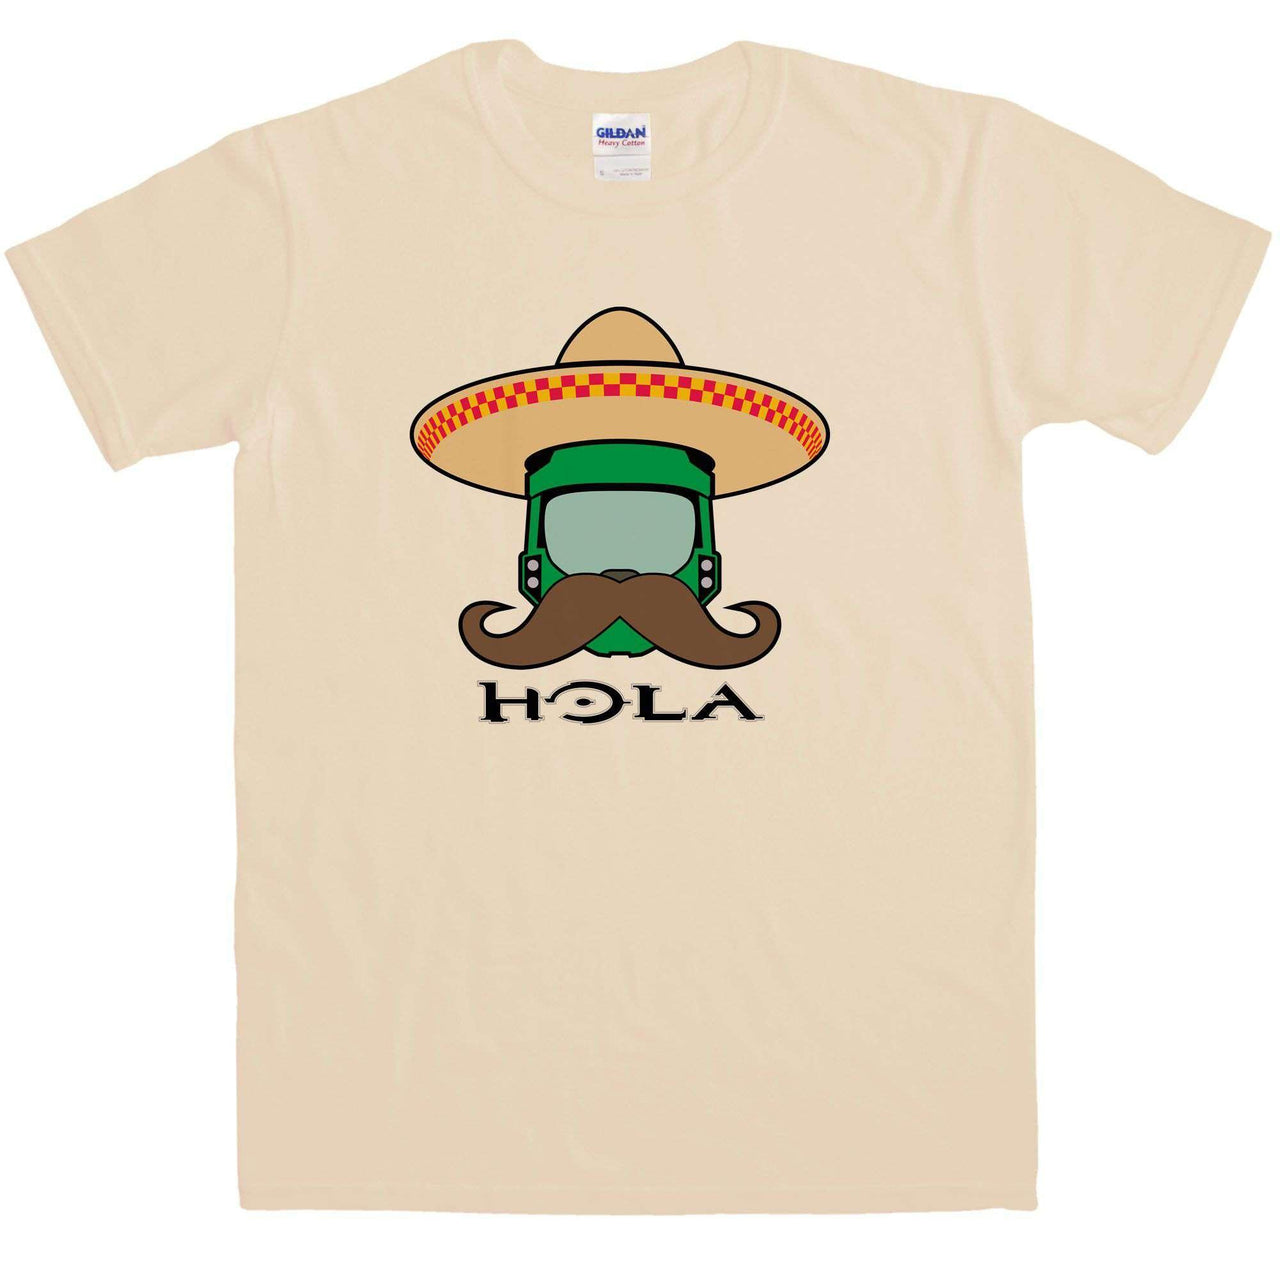 Funny Video Game Hola T-Shirt For Men 8Ball